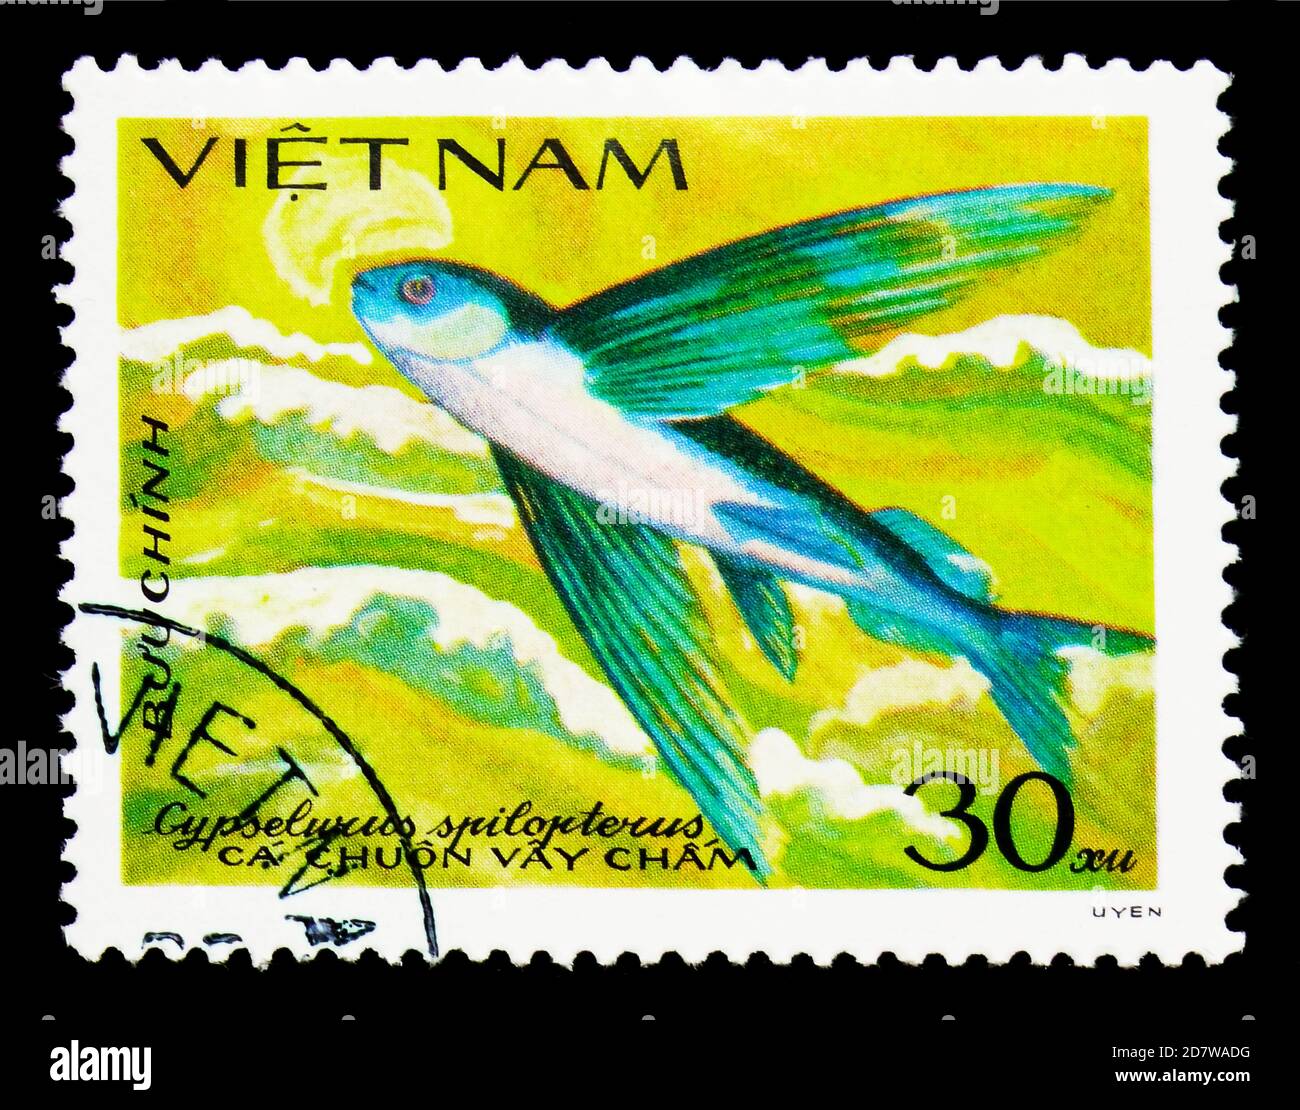 MOSCOW, RUSSIA - MARCH 28, 2018: A stamp printed in Vietnam shows Flying Fish (Cypselurus spilopterus), Fish serie, circa 1984 Stock Photo